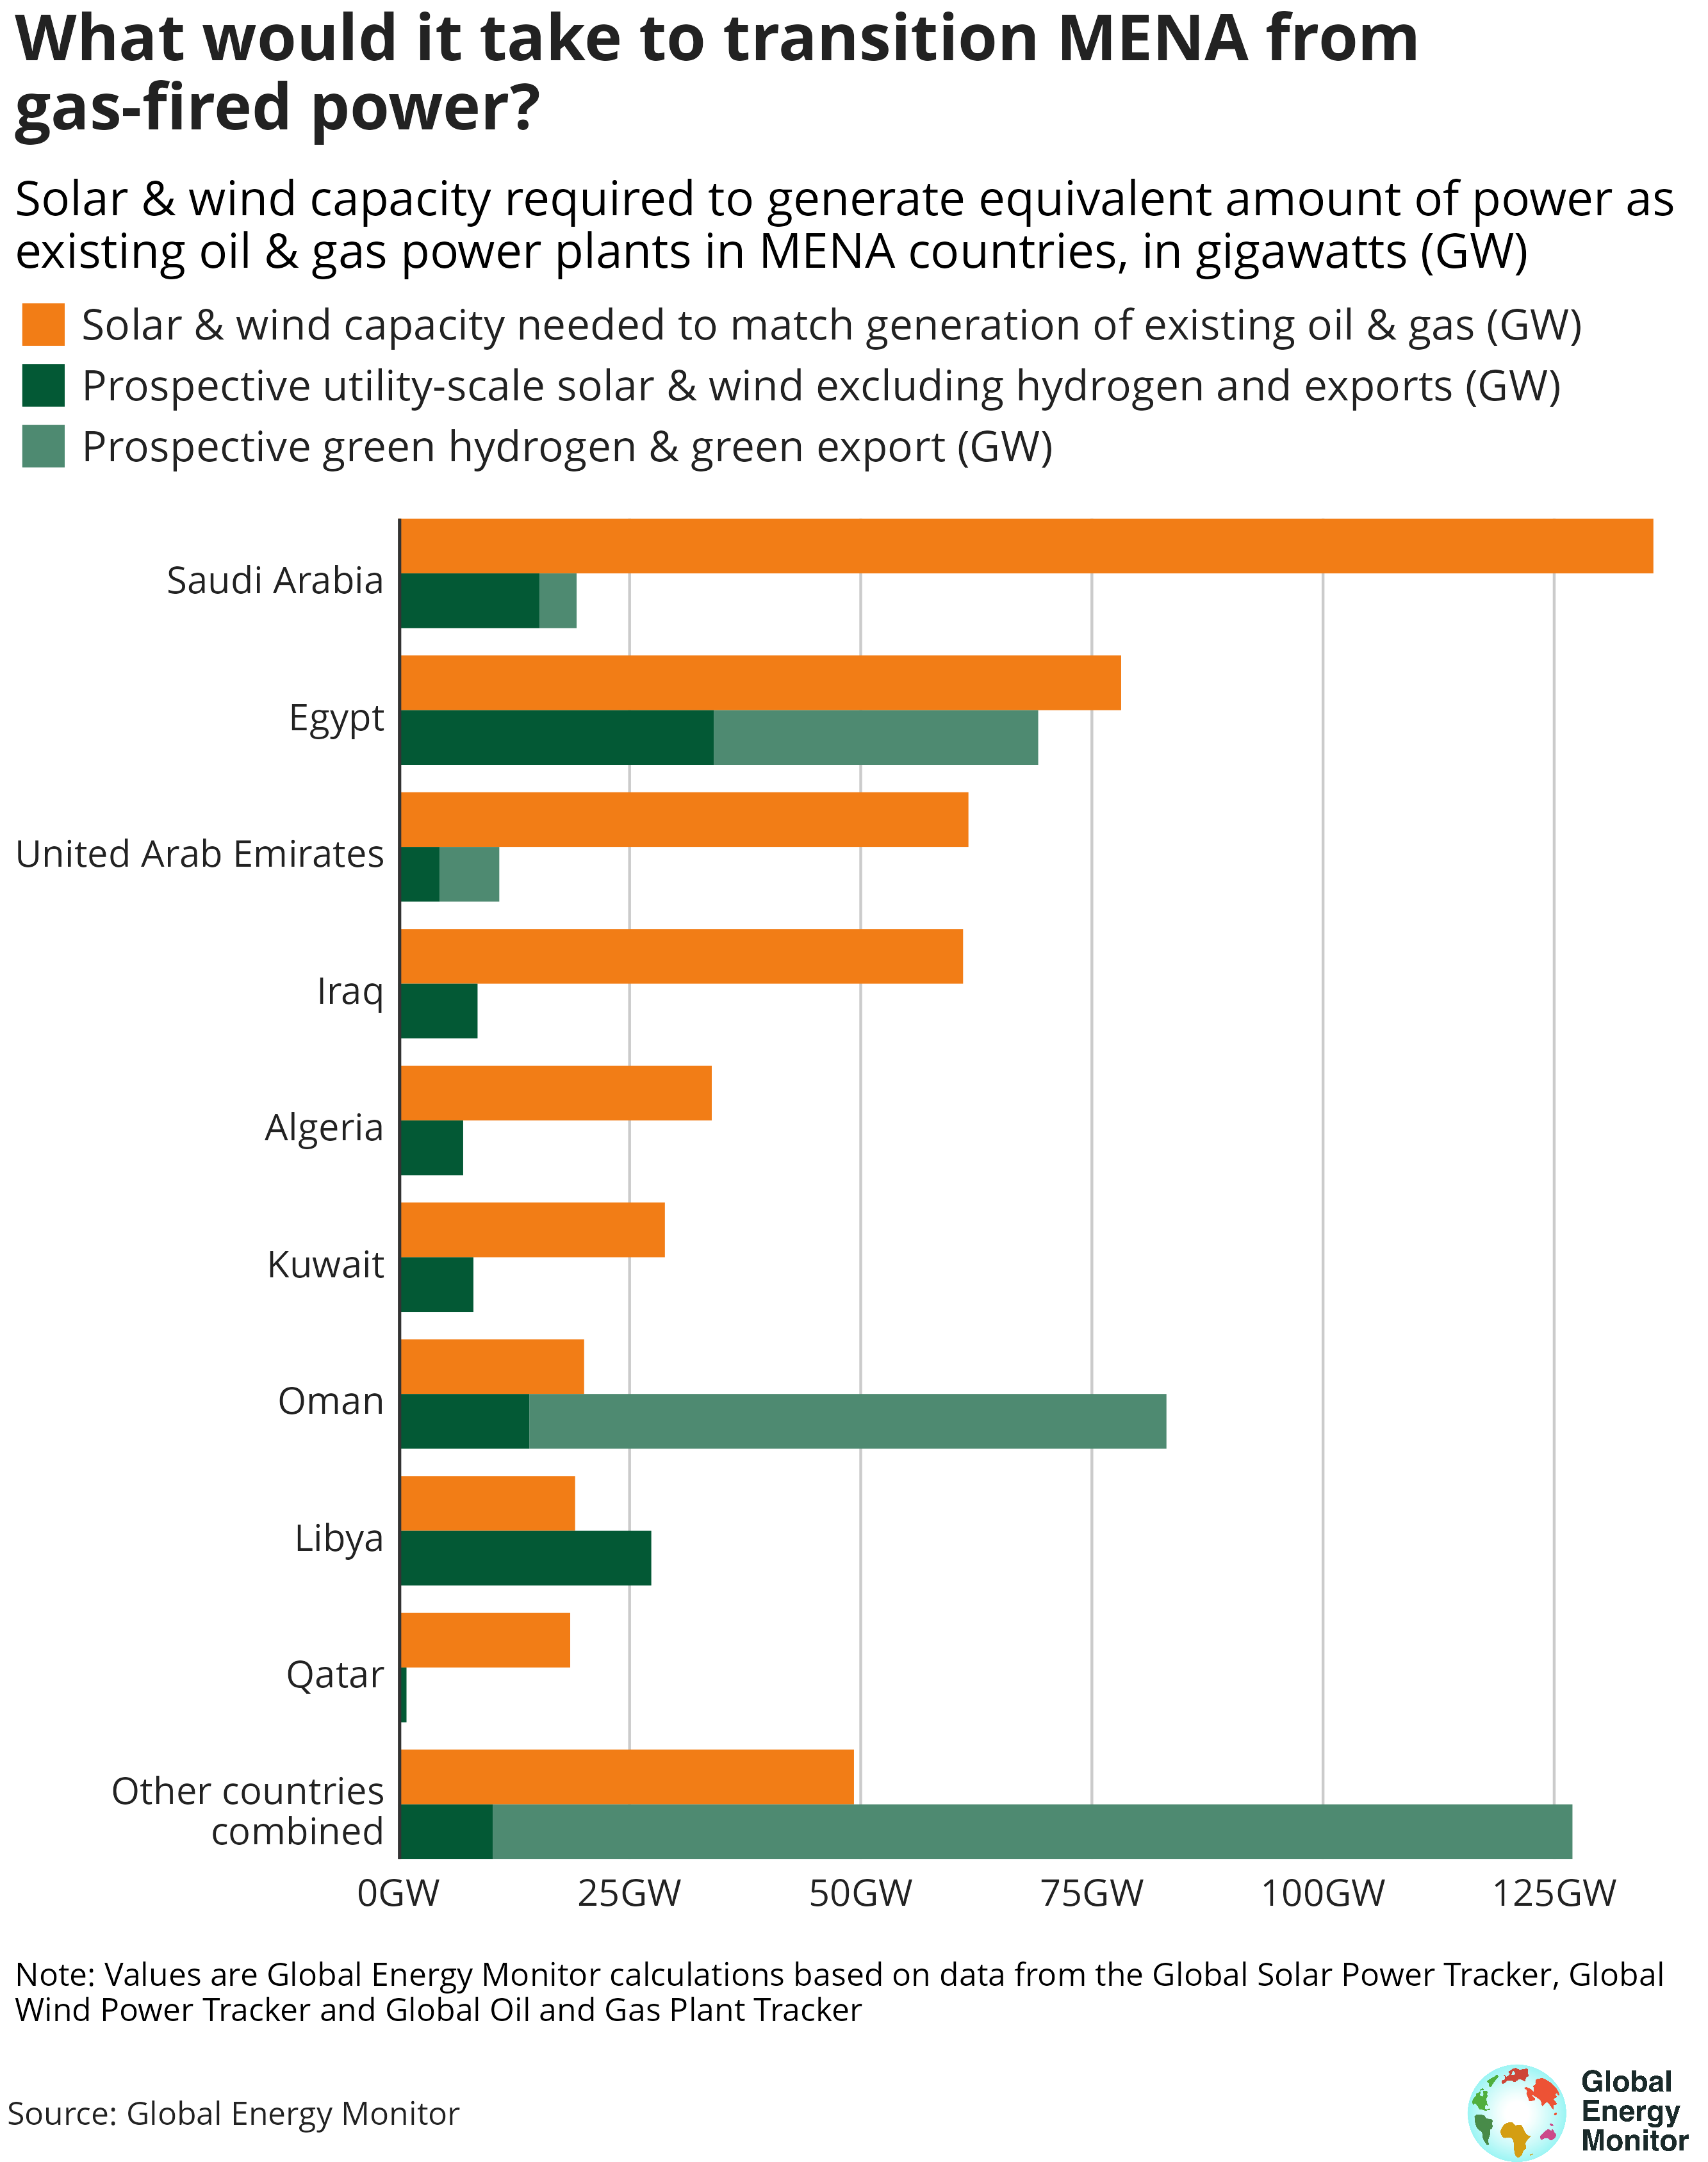 A bar chart showing what it would take for MENA countries to transition from gas power to renewables with and without green hydrogen and exports - with Saudi Arabia needing the most solar and wind capacity to match existing oil and gas capacity